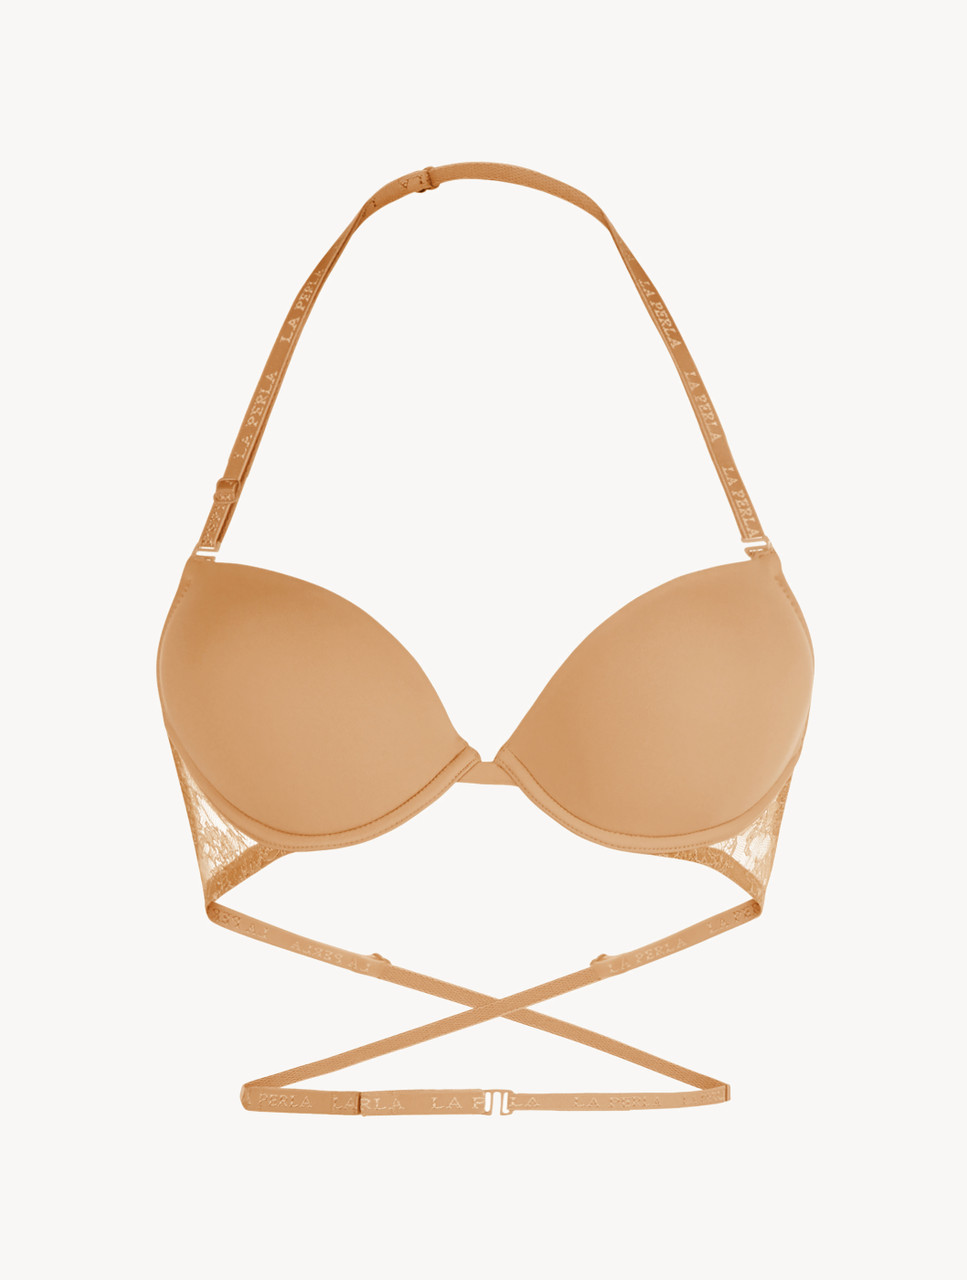 Nude T-shirt multiway bra with Chantilly lace - ONLINE EXCLUSIVE